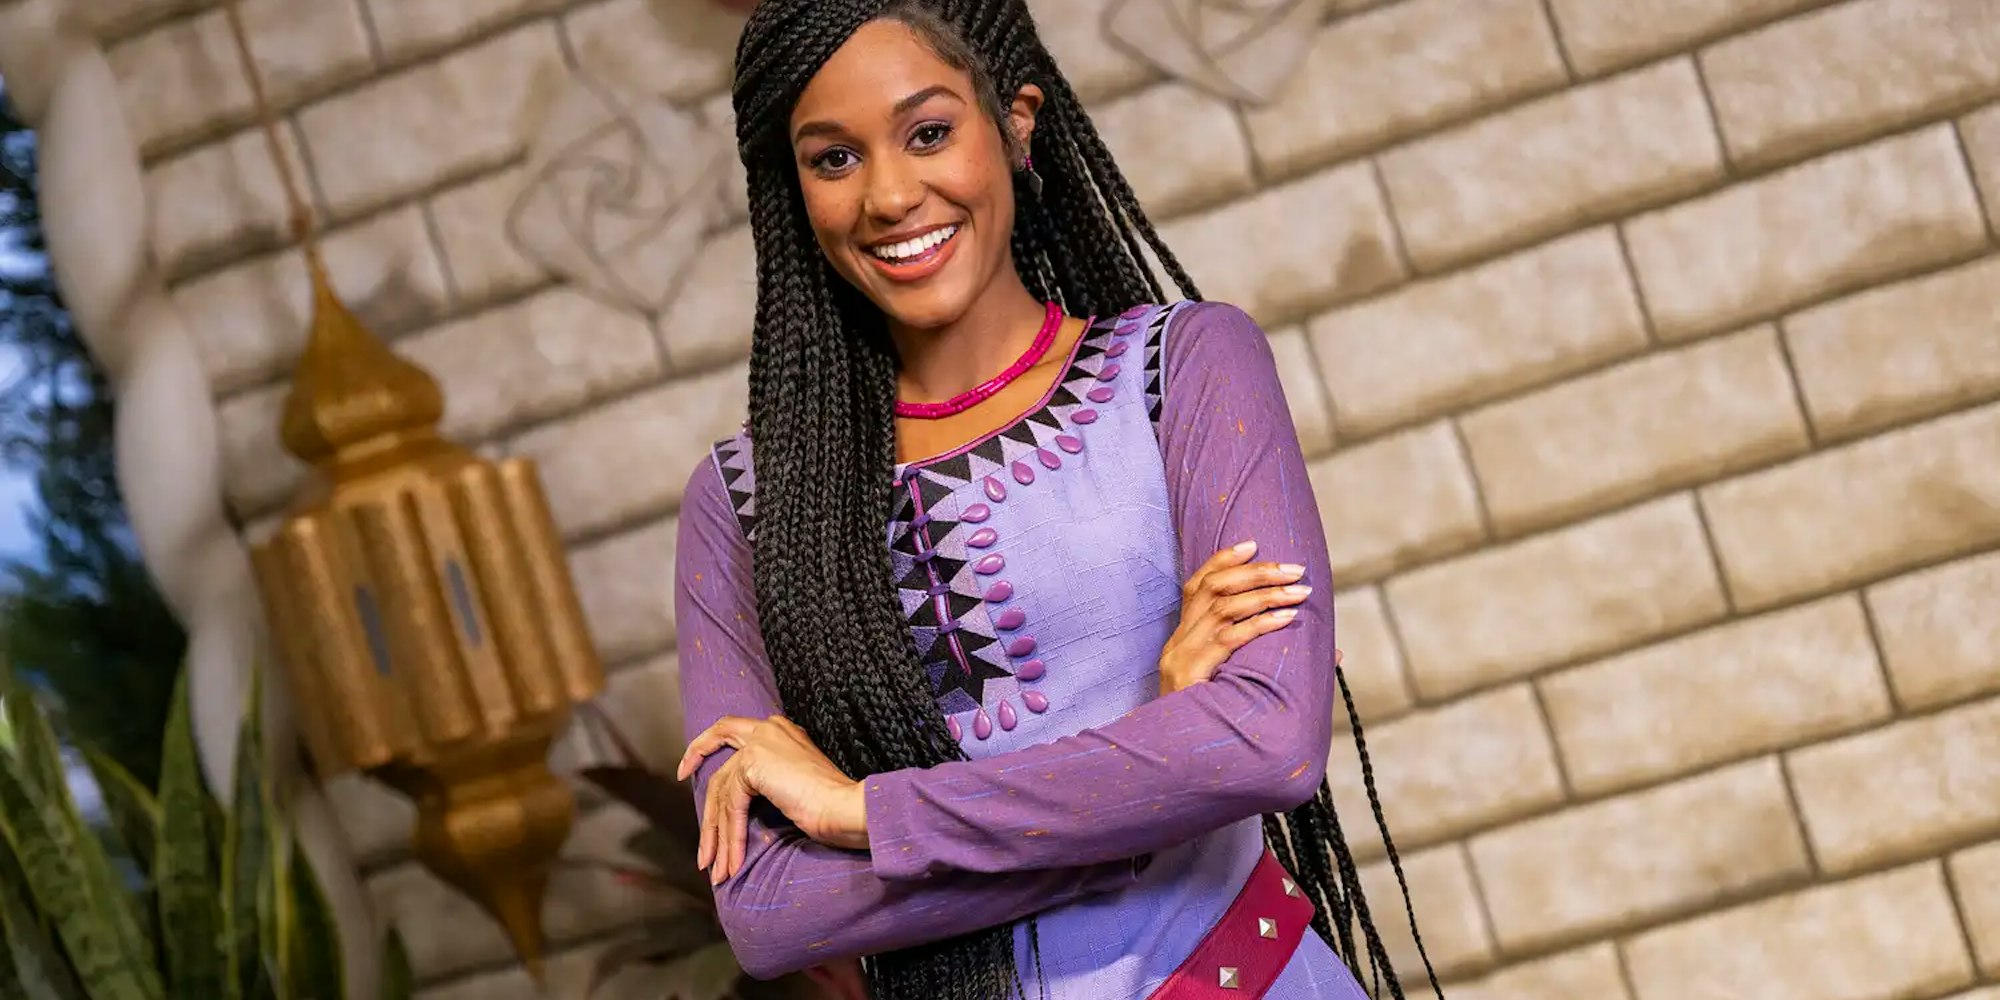 Cover Image for Asha from Disney’s Wish Meeting in EPCOT